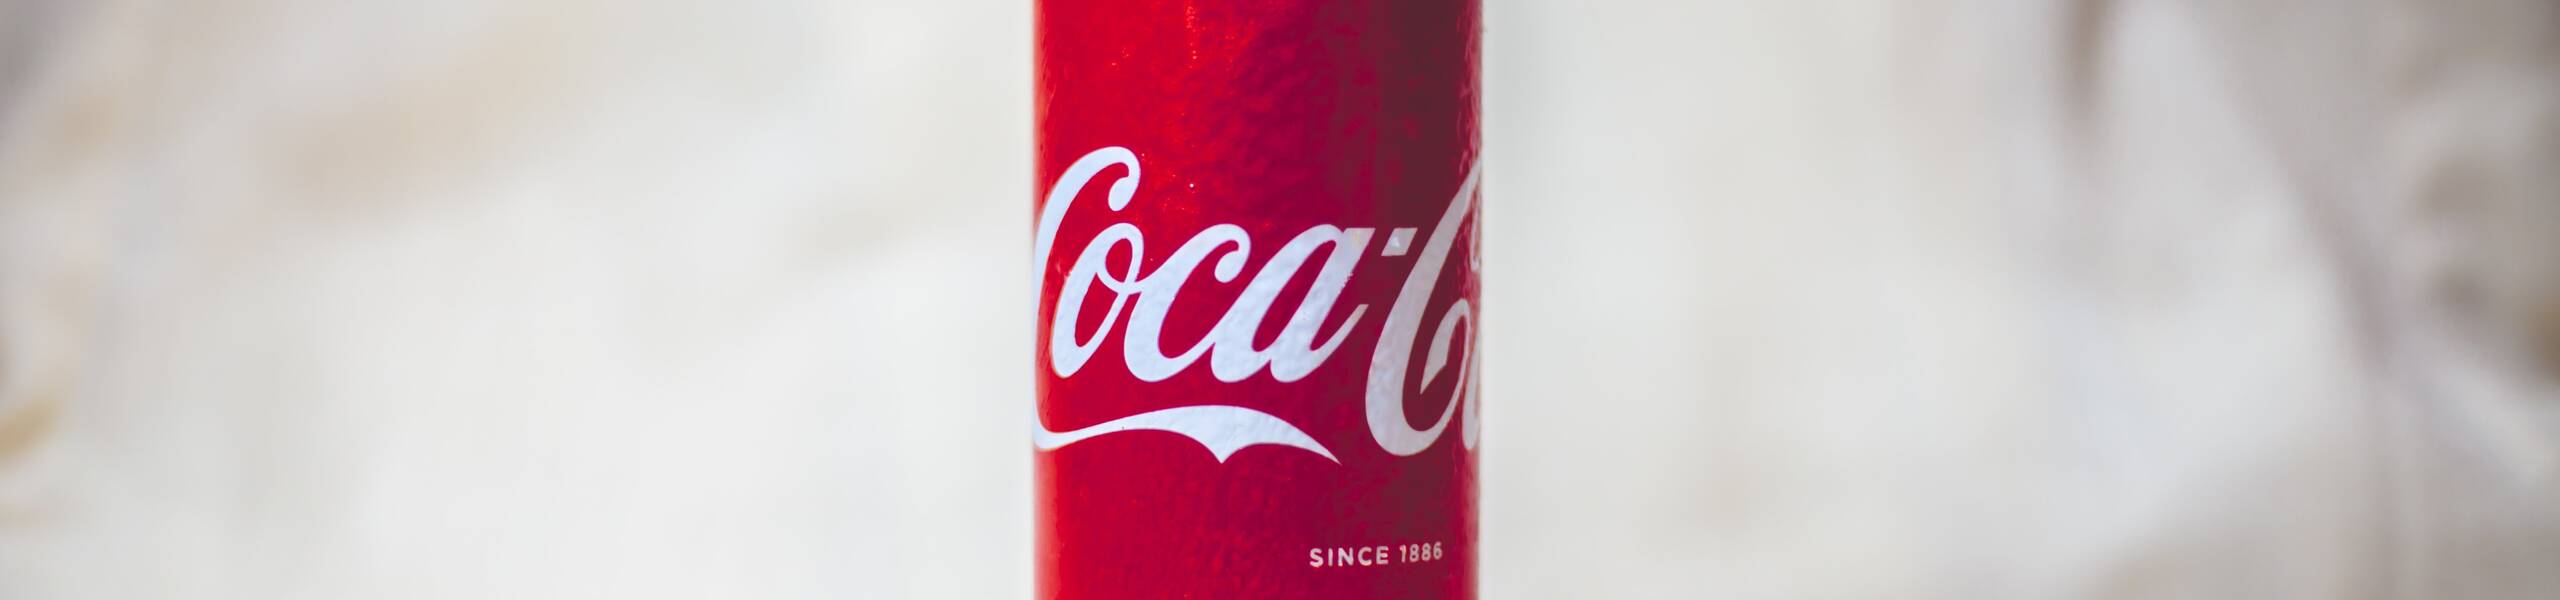 Coca-Cola: time for new all-time highs?